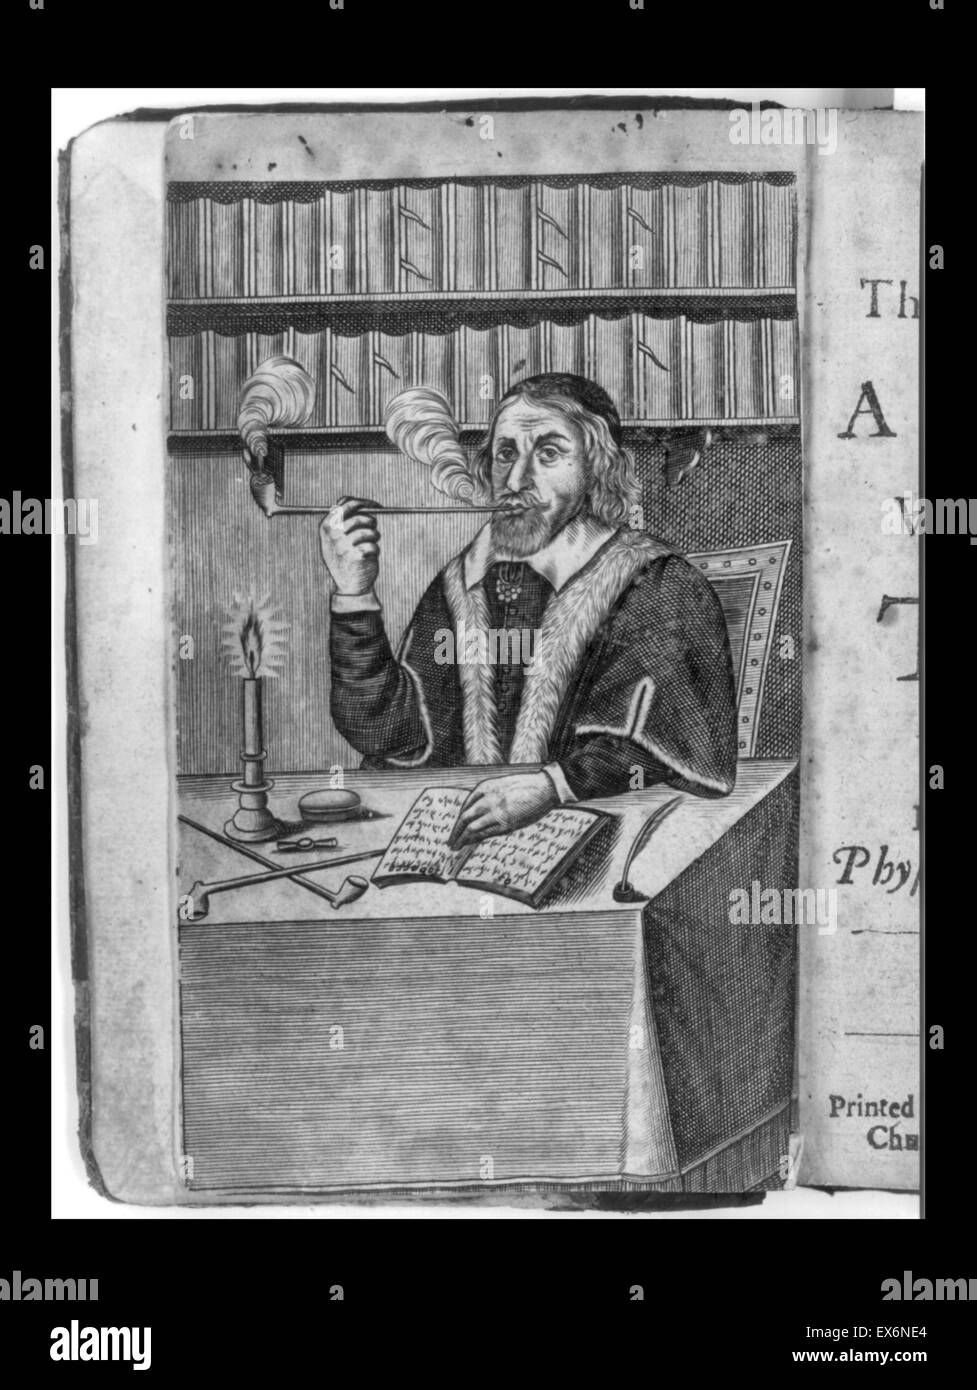 Man smoking a long pipe, seated at table with book, candle and 2 more long pipes 1659. Illustration in Panacea: or, the Universal Medicine, by Dr. Giles Everard Stock Photo